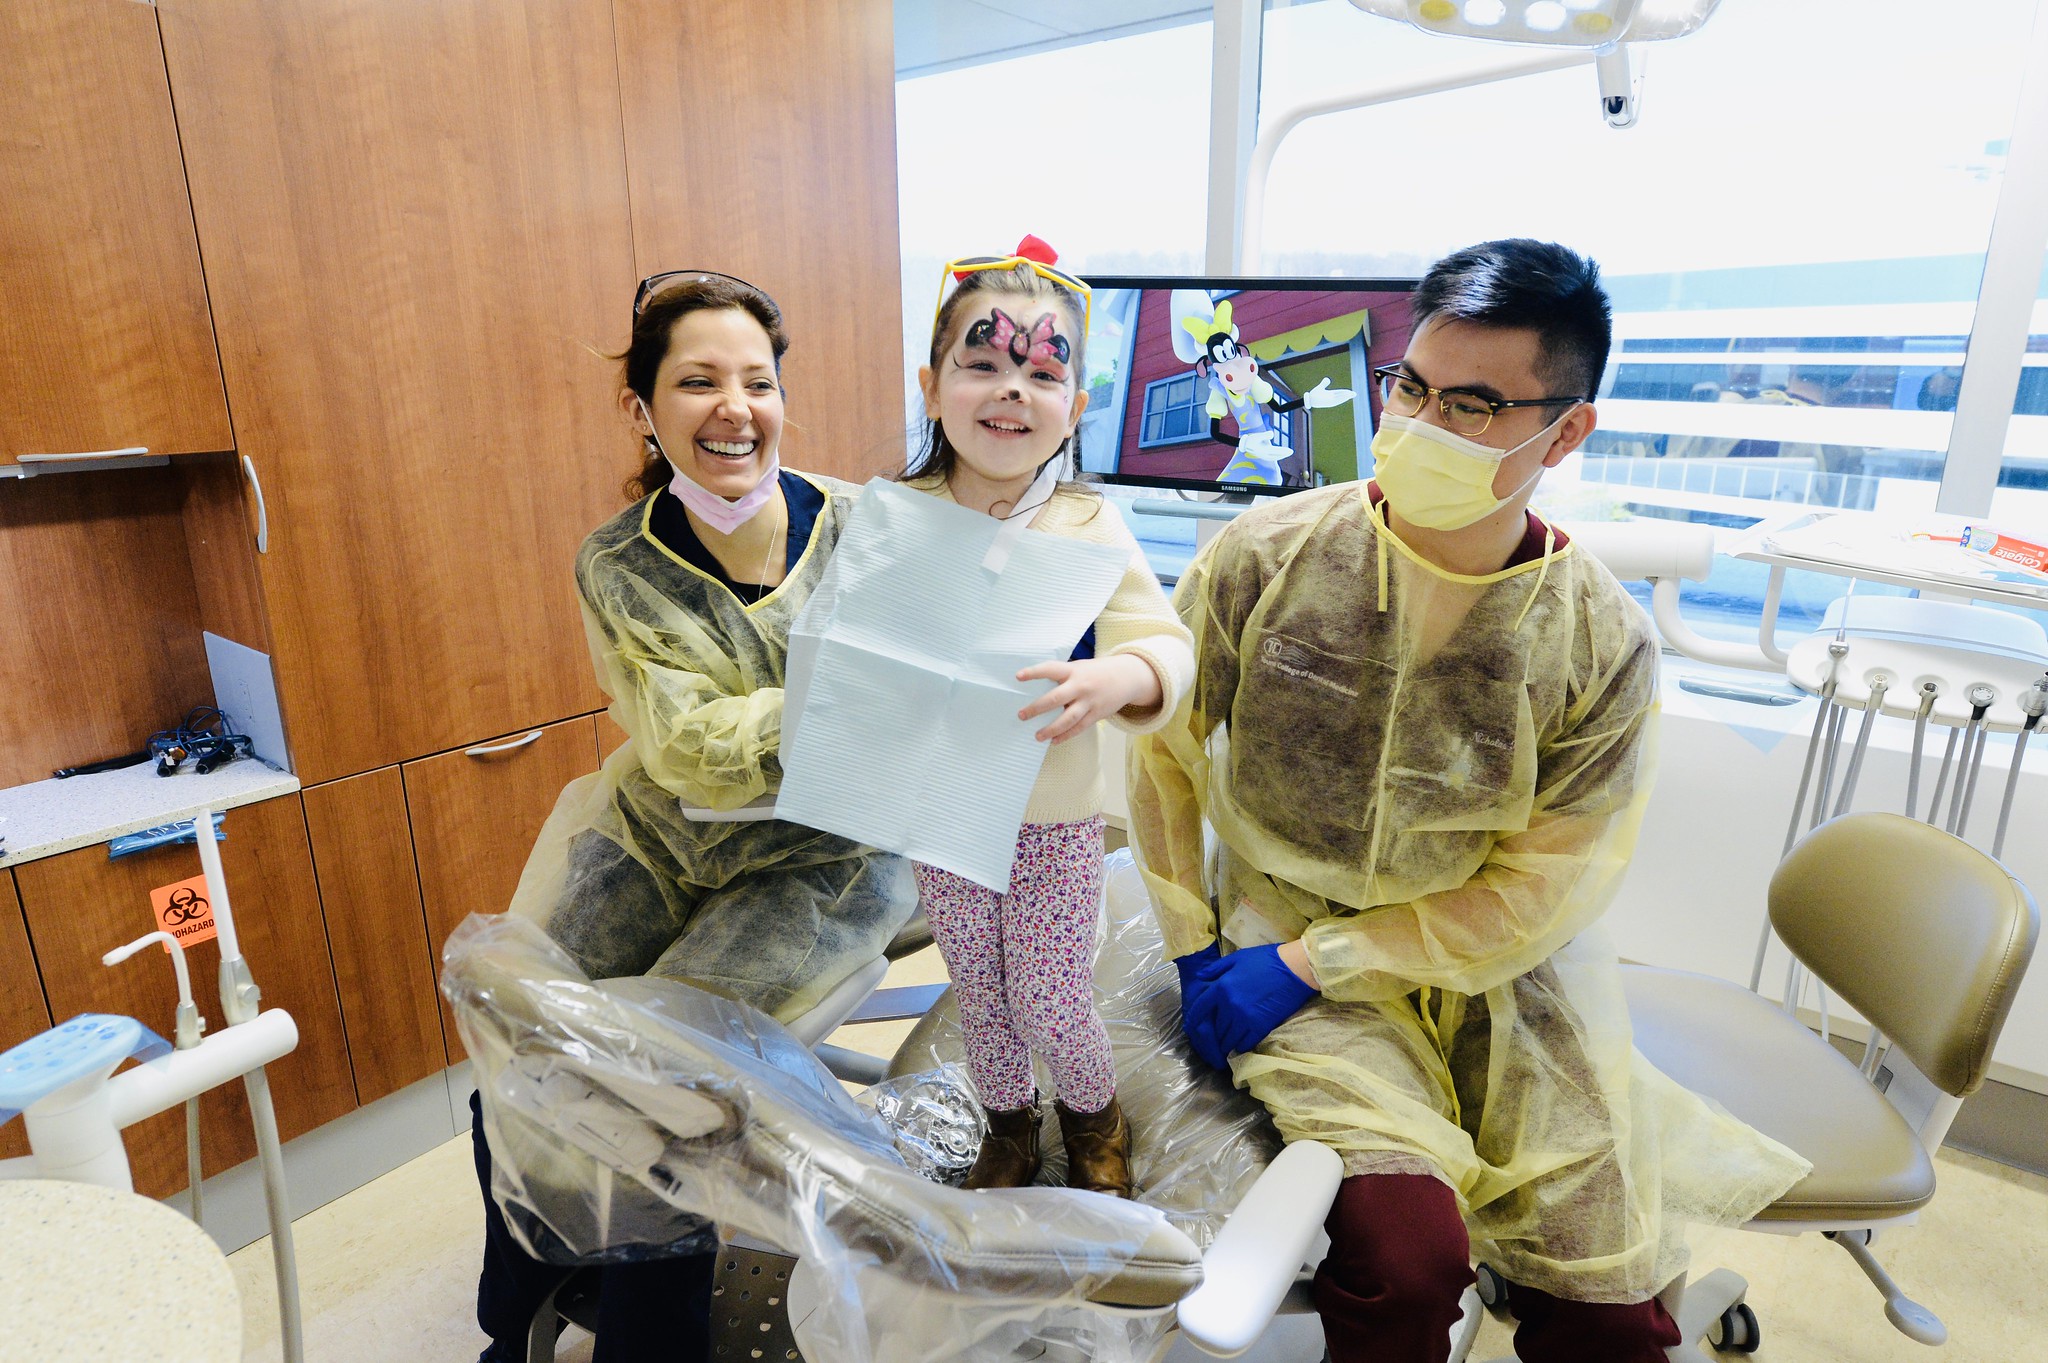 Give Kids A Smile! Day, was 3-year-old Emma's first visit to the dentist.